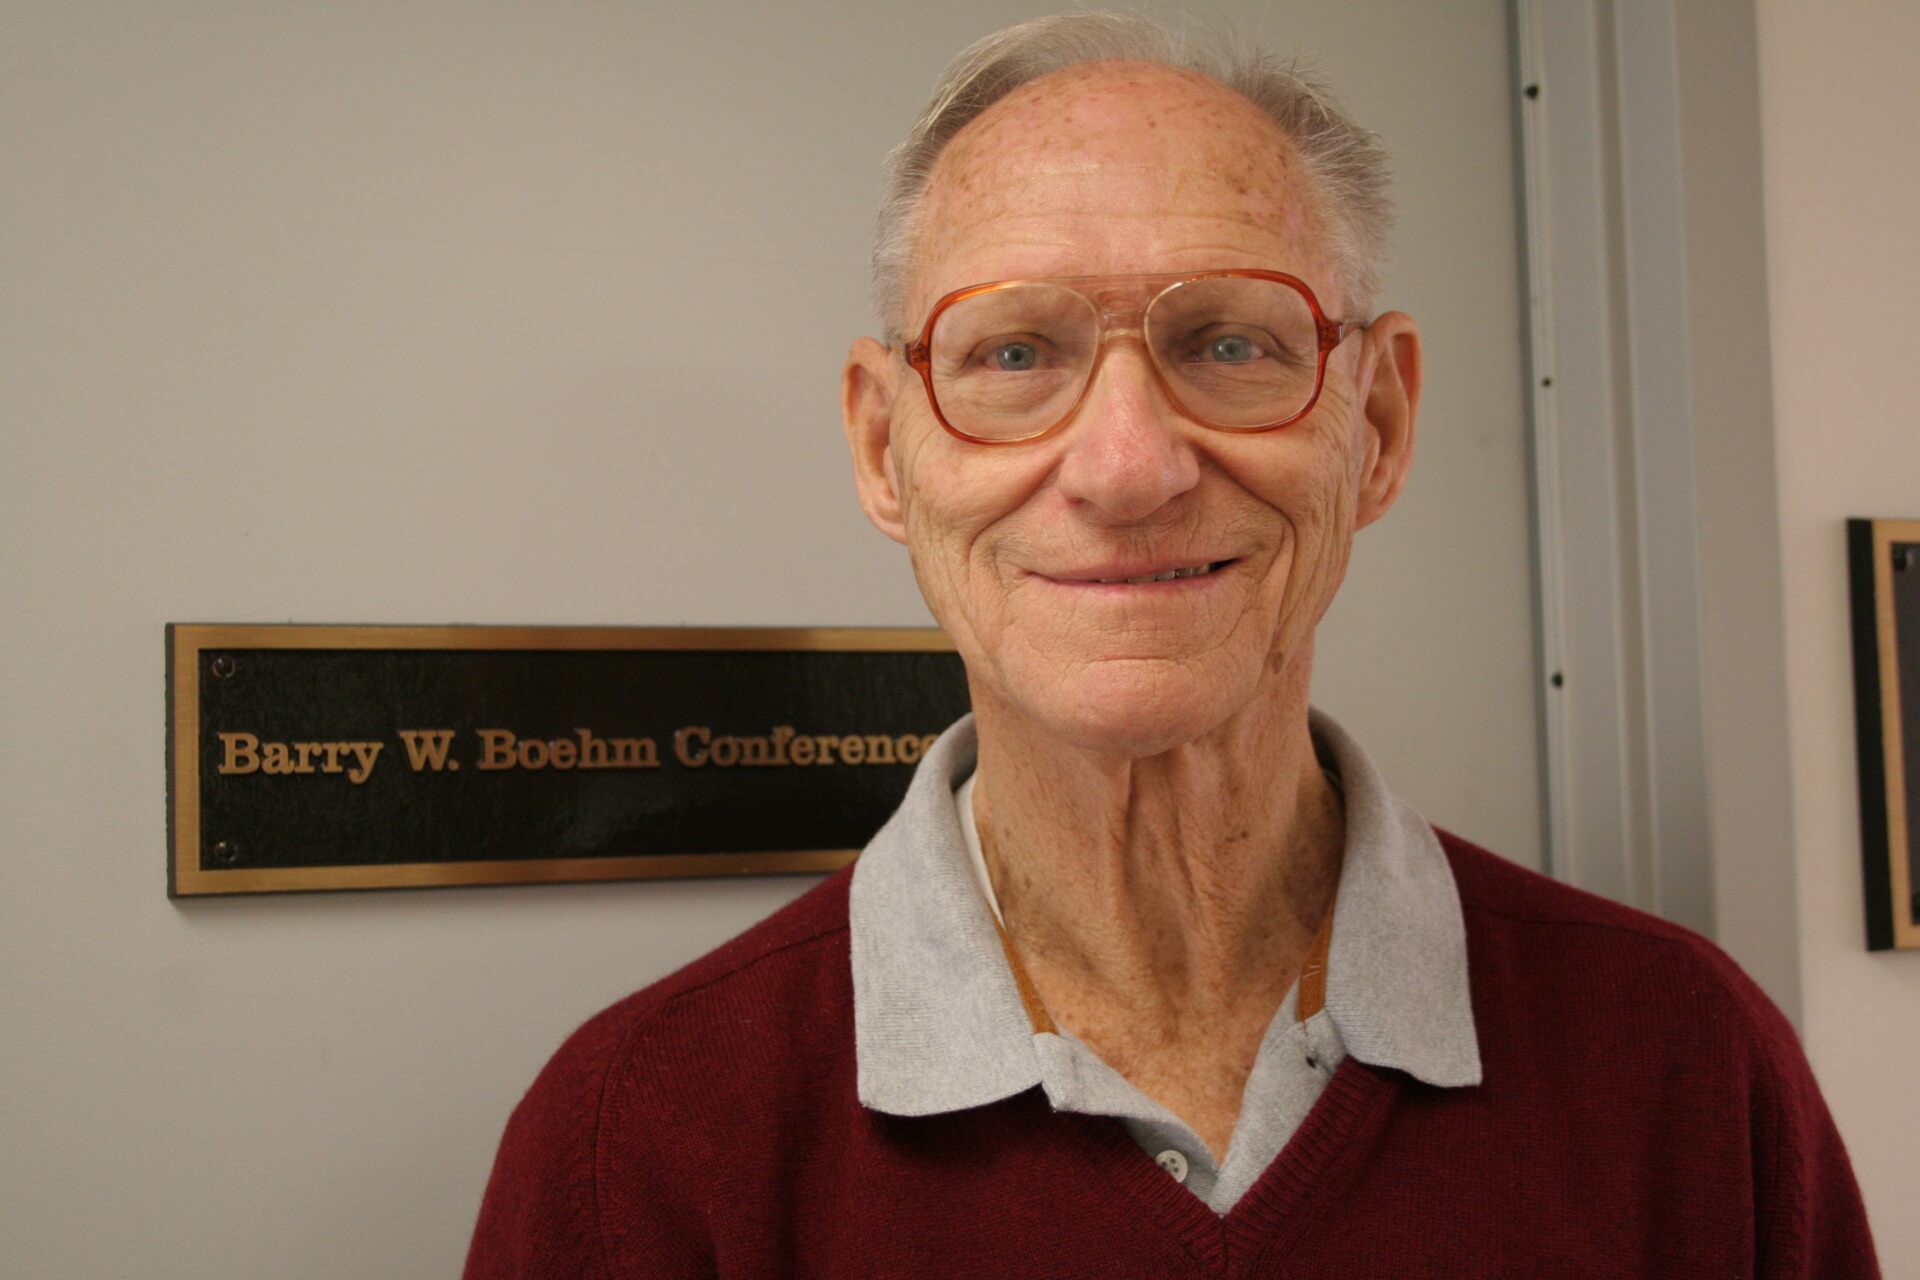 Barry Boehm <span style="font-weight: 400;">was known as a gentle individual and passionate researcher. Photo/USC Viterbi. </span>